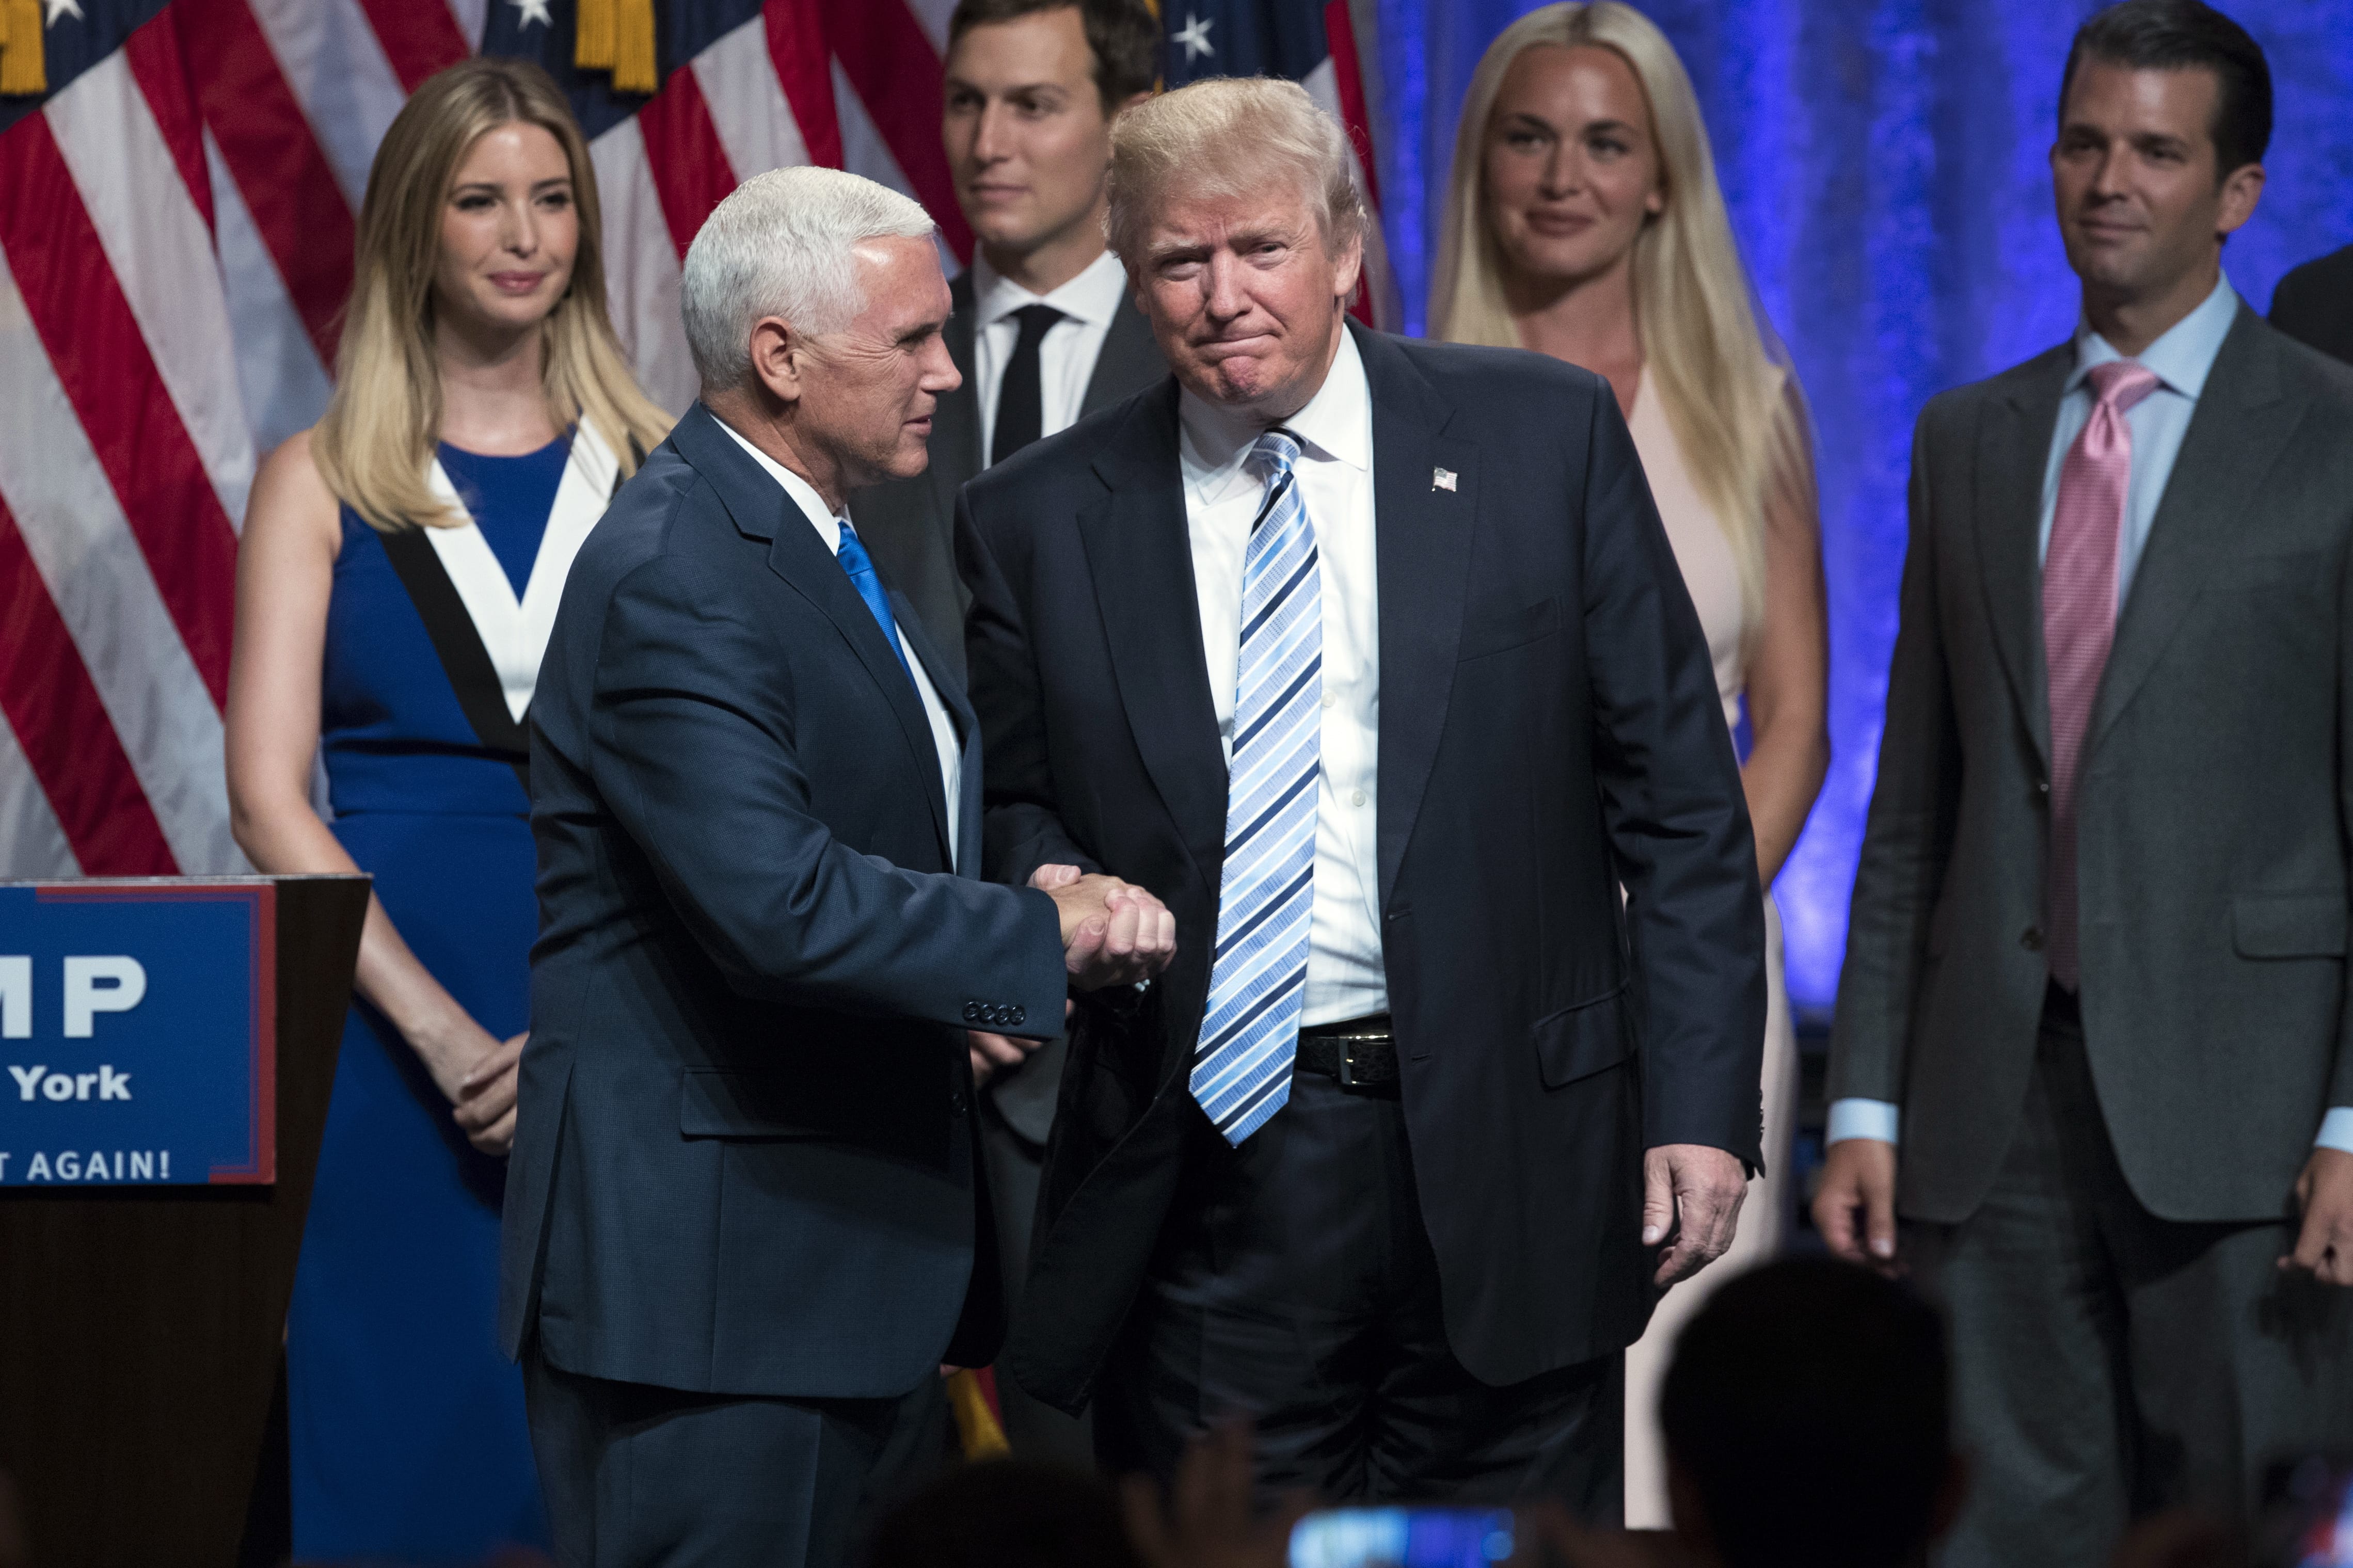 Republican presidential candidate Donald Trump, right, shakes hands with Gov. Mike Pence, R-Ind., during a campaign event to announce Pence as the vice presidential running mate on, Saturday, July 16, 2016, in New York.  Trump introduced Pence calling him "my partner in this campaign" and his first and best choice to join him on a winning Republican presidential ticket.